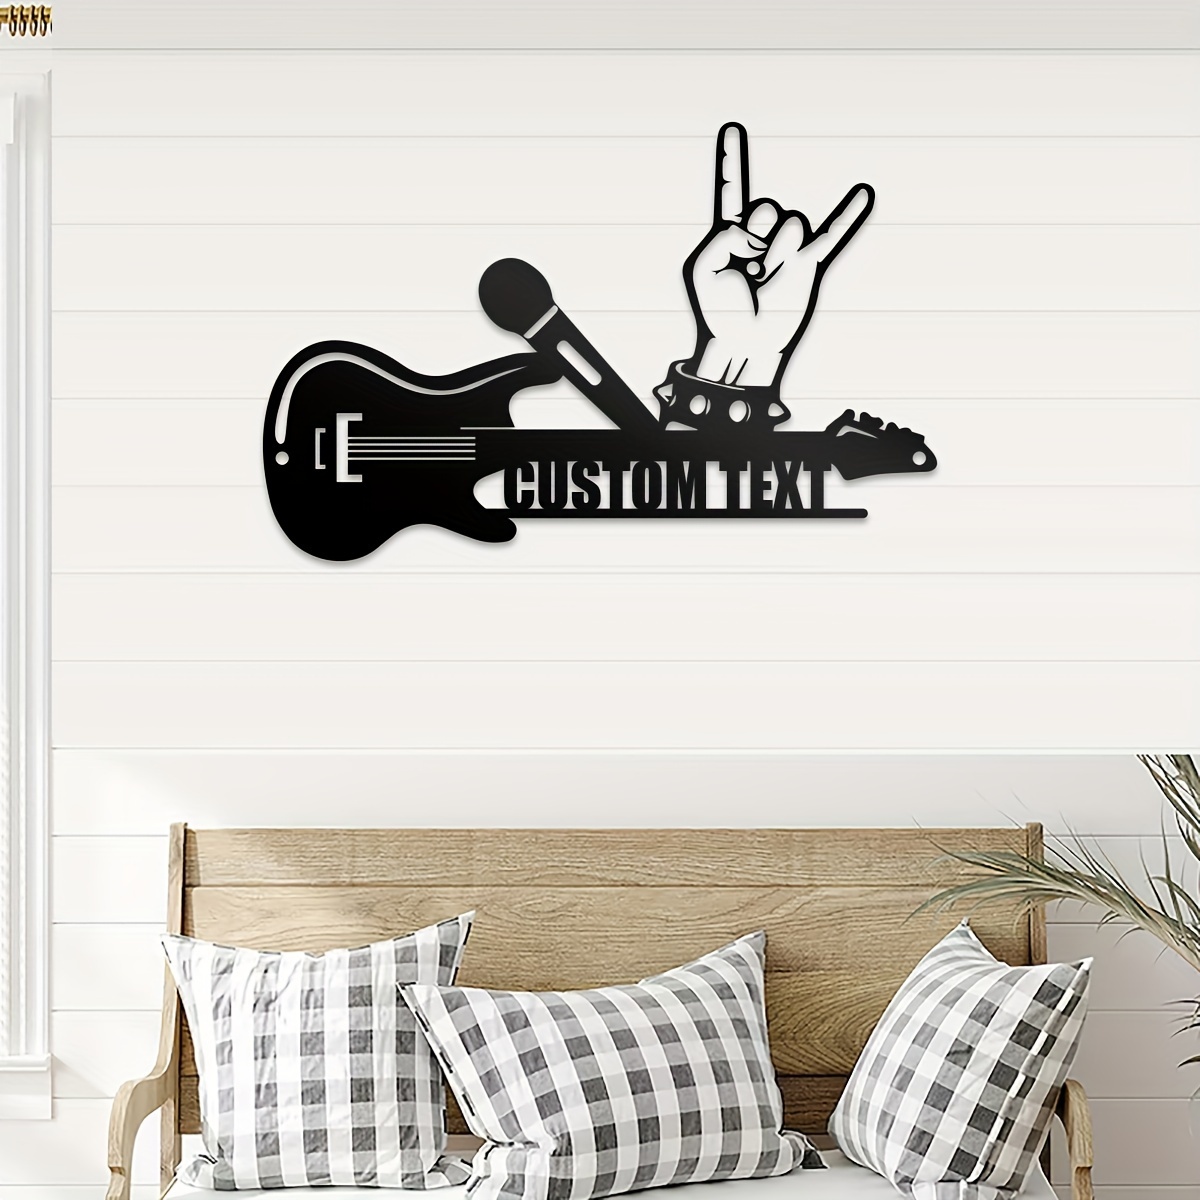 

1pc, Personalized Rock Hand Gesture & Guitar Metal Wall Sign With Custom Text, Decor For Music Studio, Guitar Wall Emblem For Music Room, Ideal Gift For Guitarists And Music Lovers